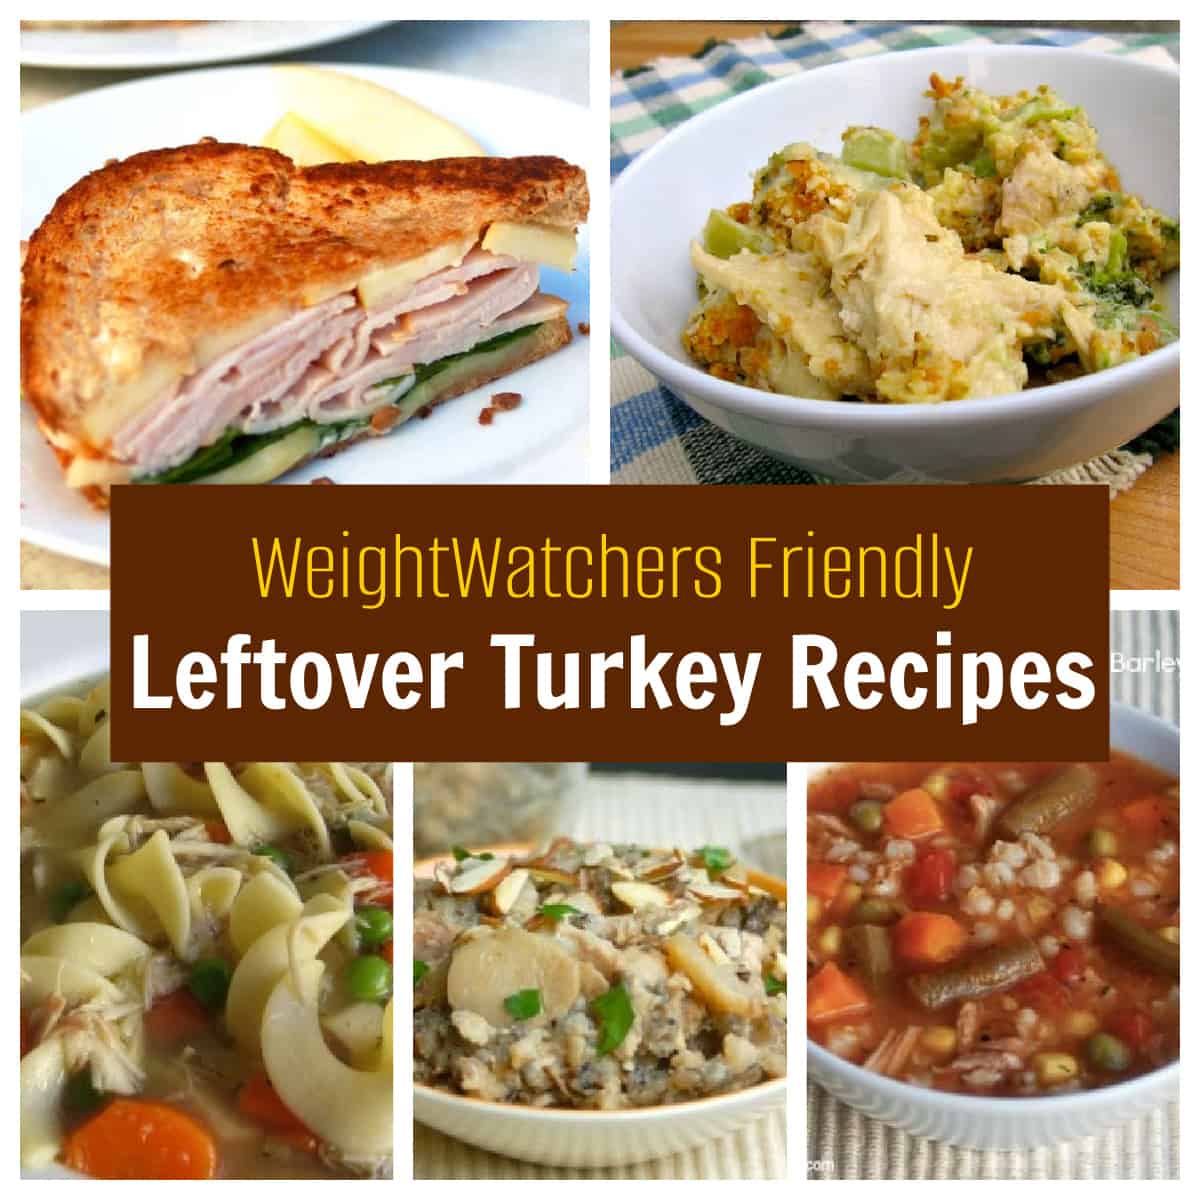 Best Healthy Make Ahead Freezer Meals for Holiday Leftovers